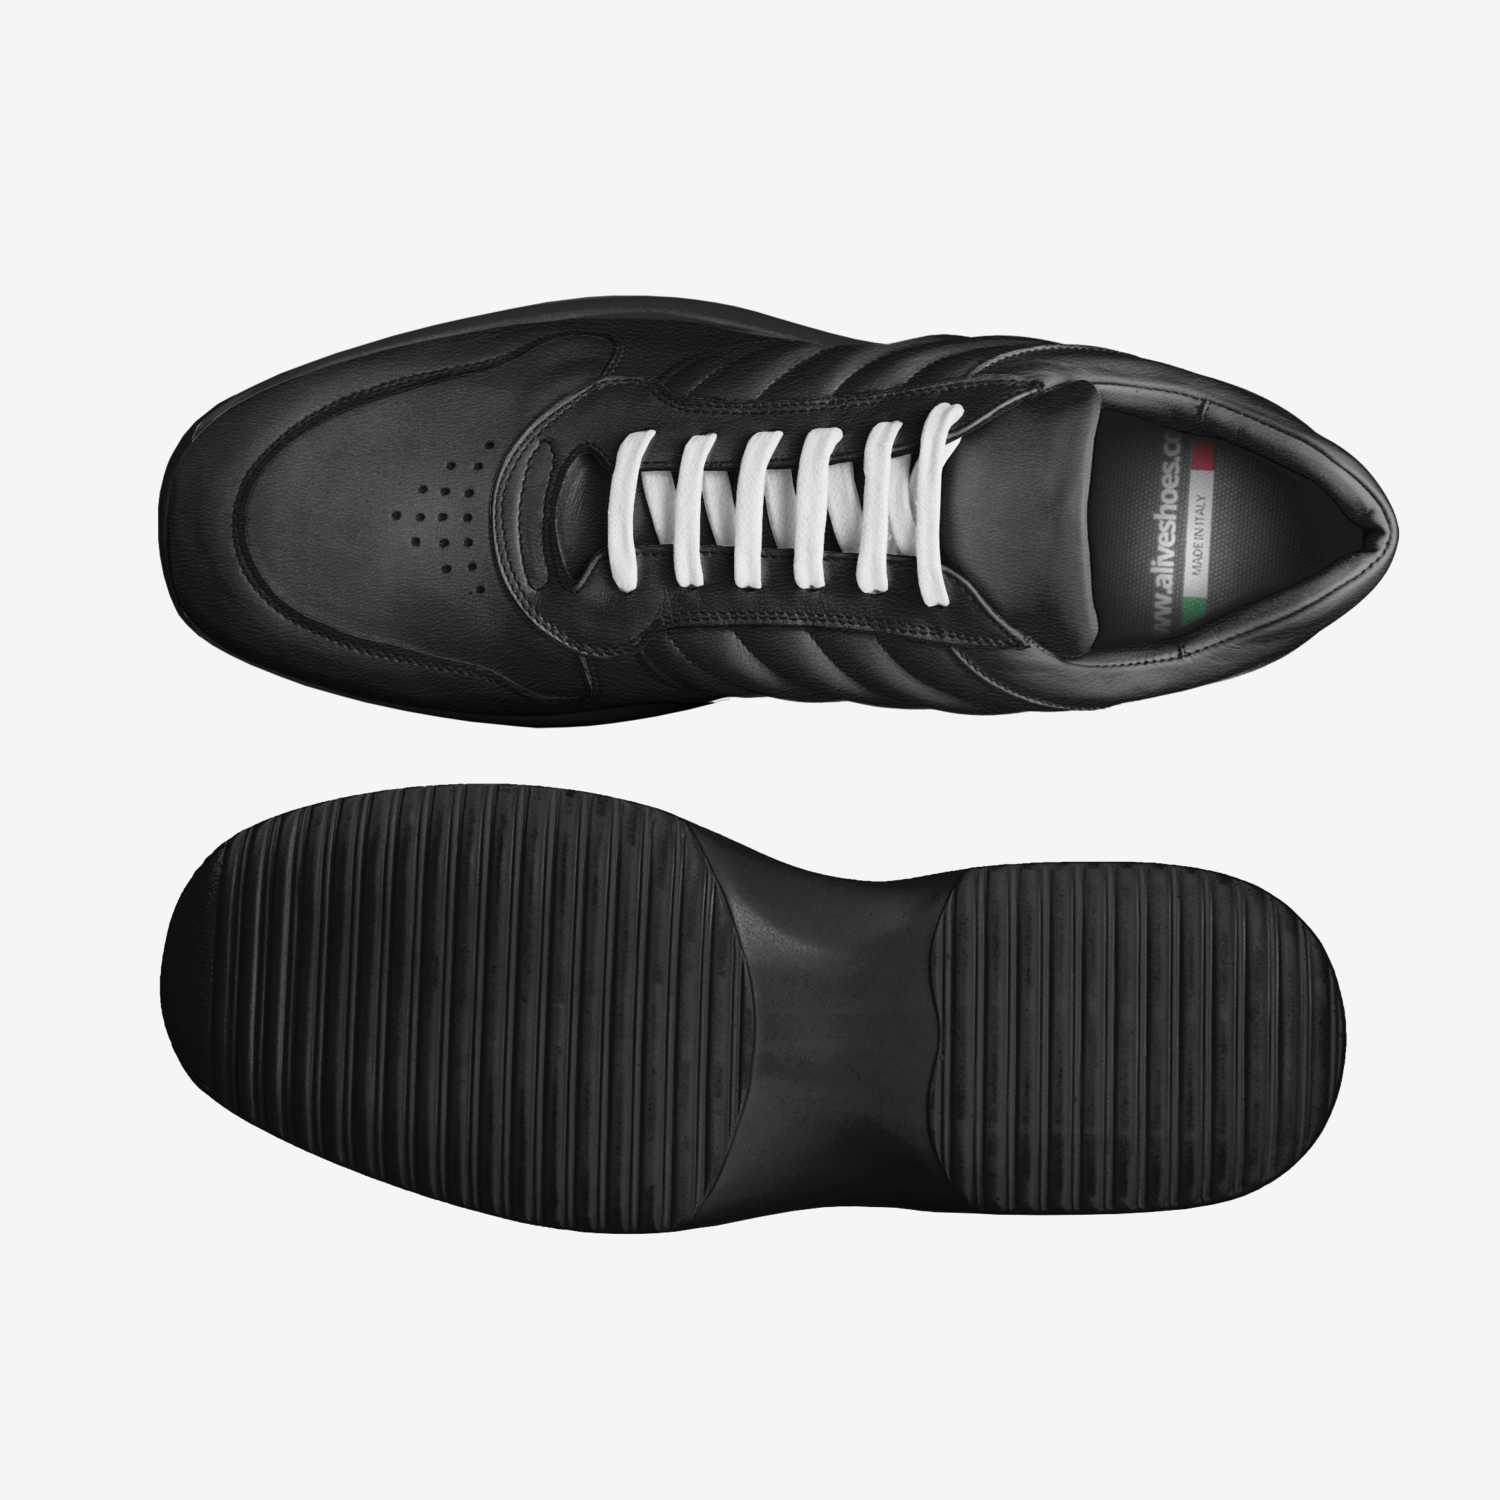 xder | A Custom Shoe concept by Brayan Vaccaro